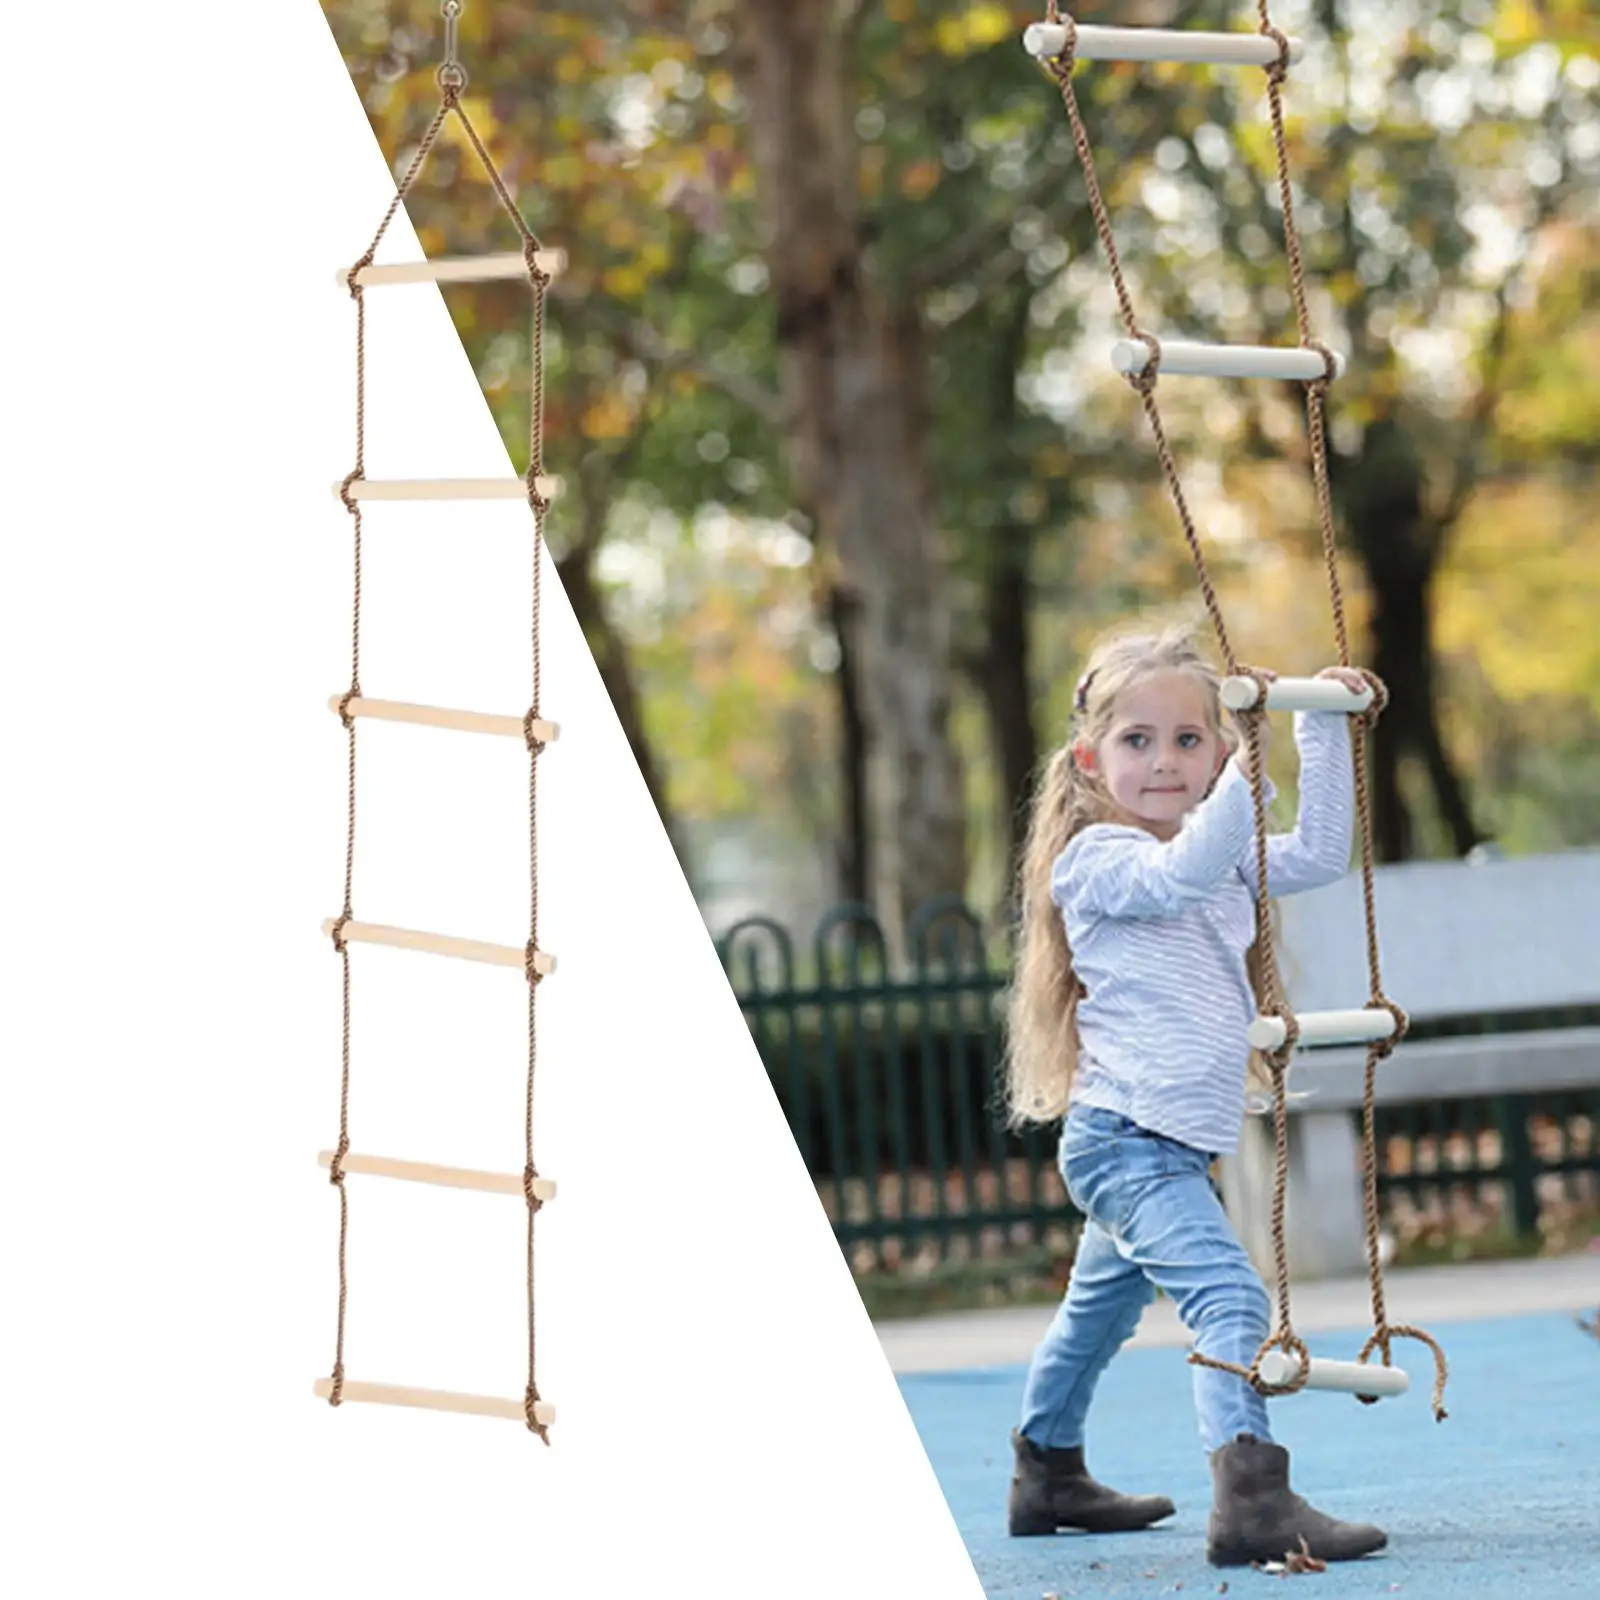 Climbing Rope Ladder Swivel Accessories Tools for Outdoor Garden Playground